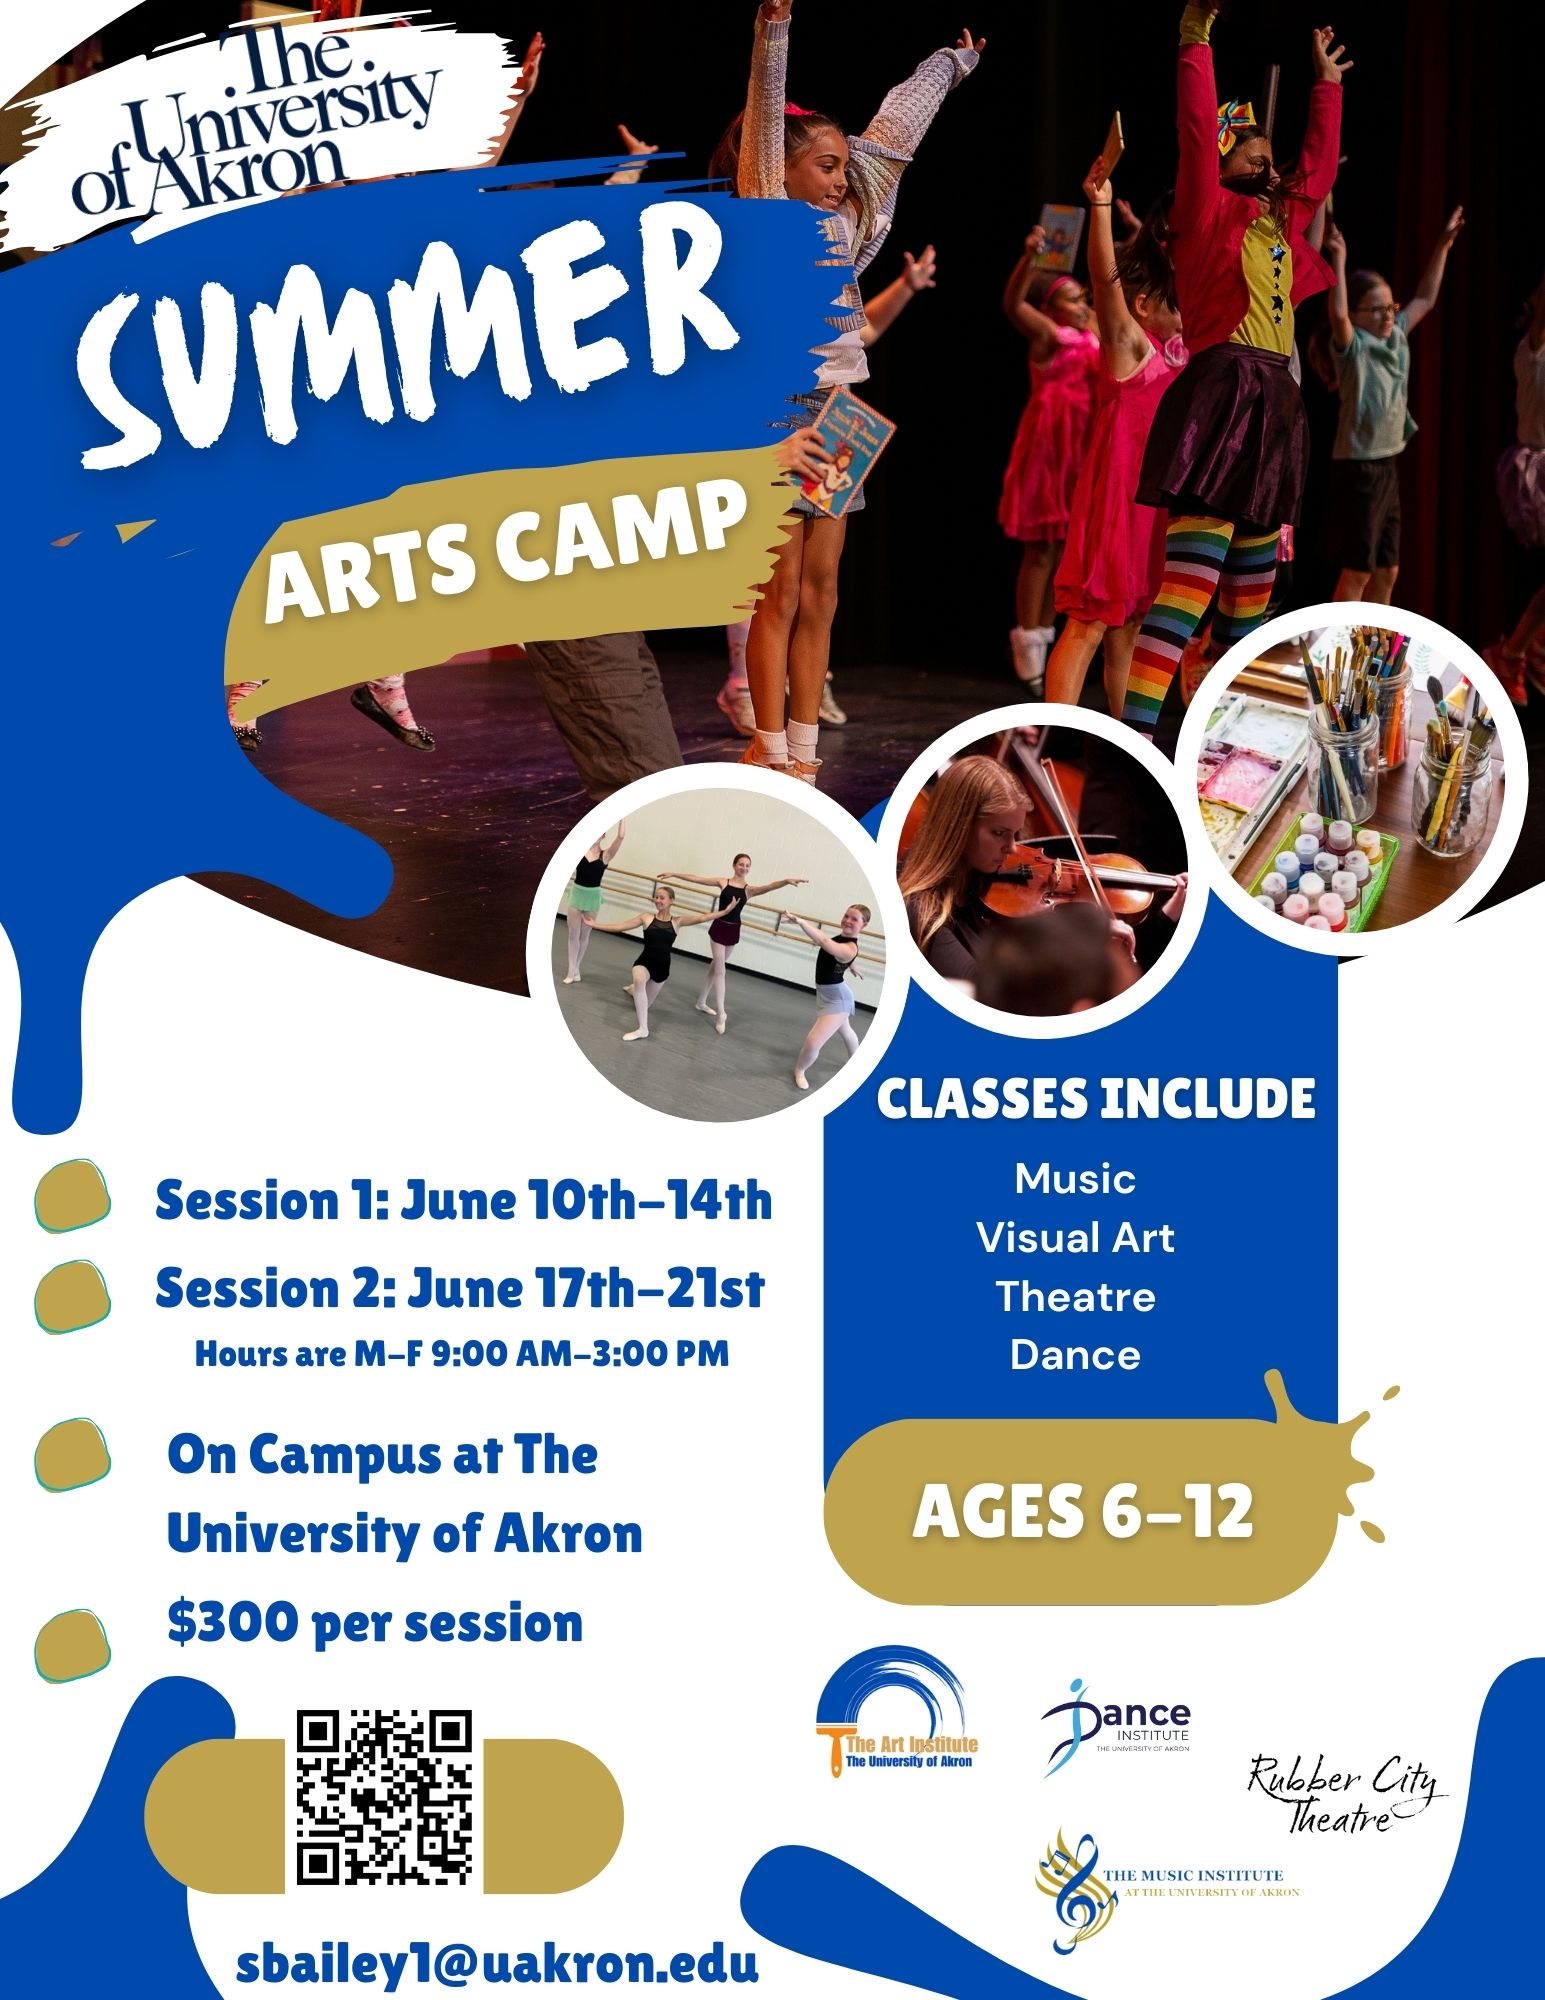 Summer Arts Academy Camp at the University of Akron School of Music